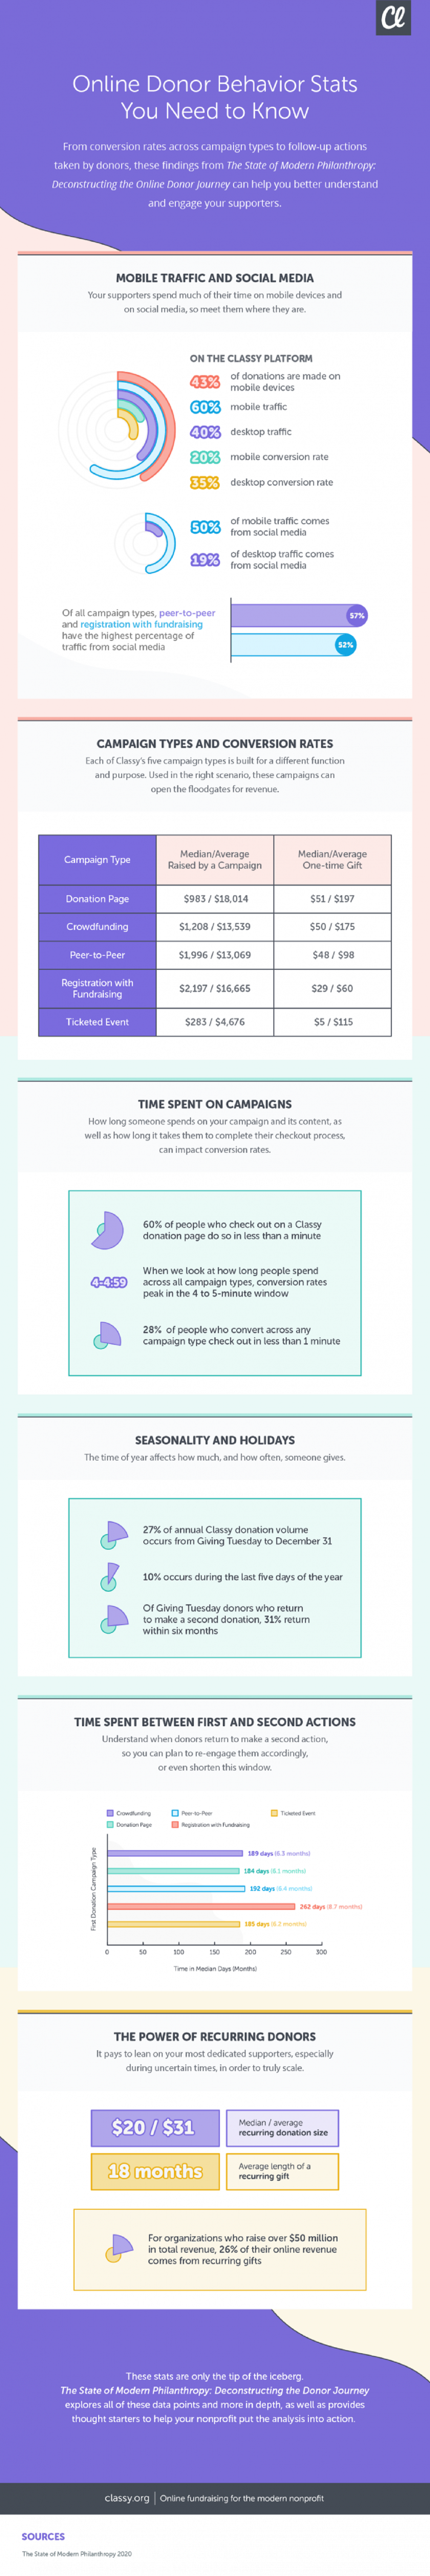 online-donor-behavior-stats-you-need-to-know-infographic